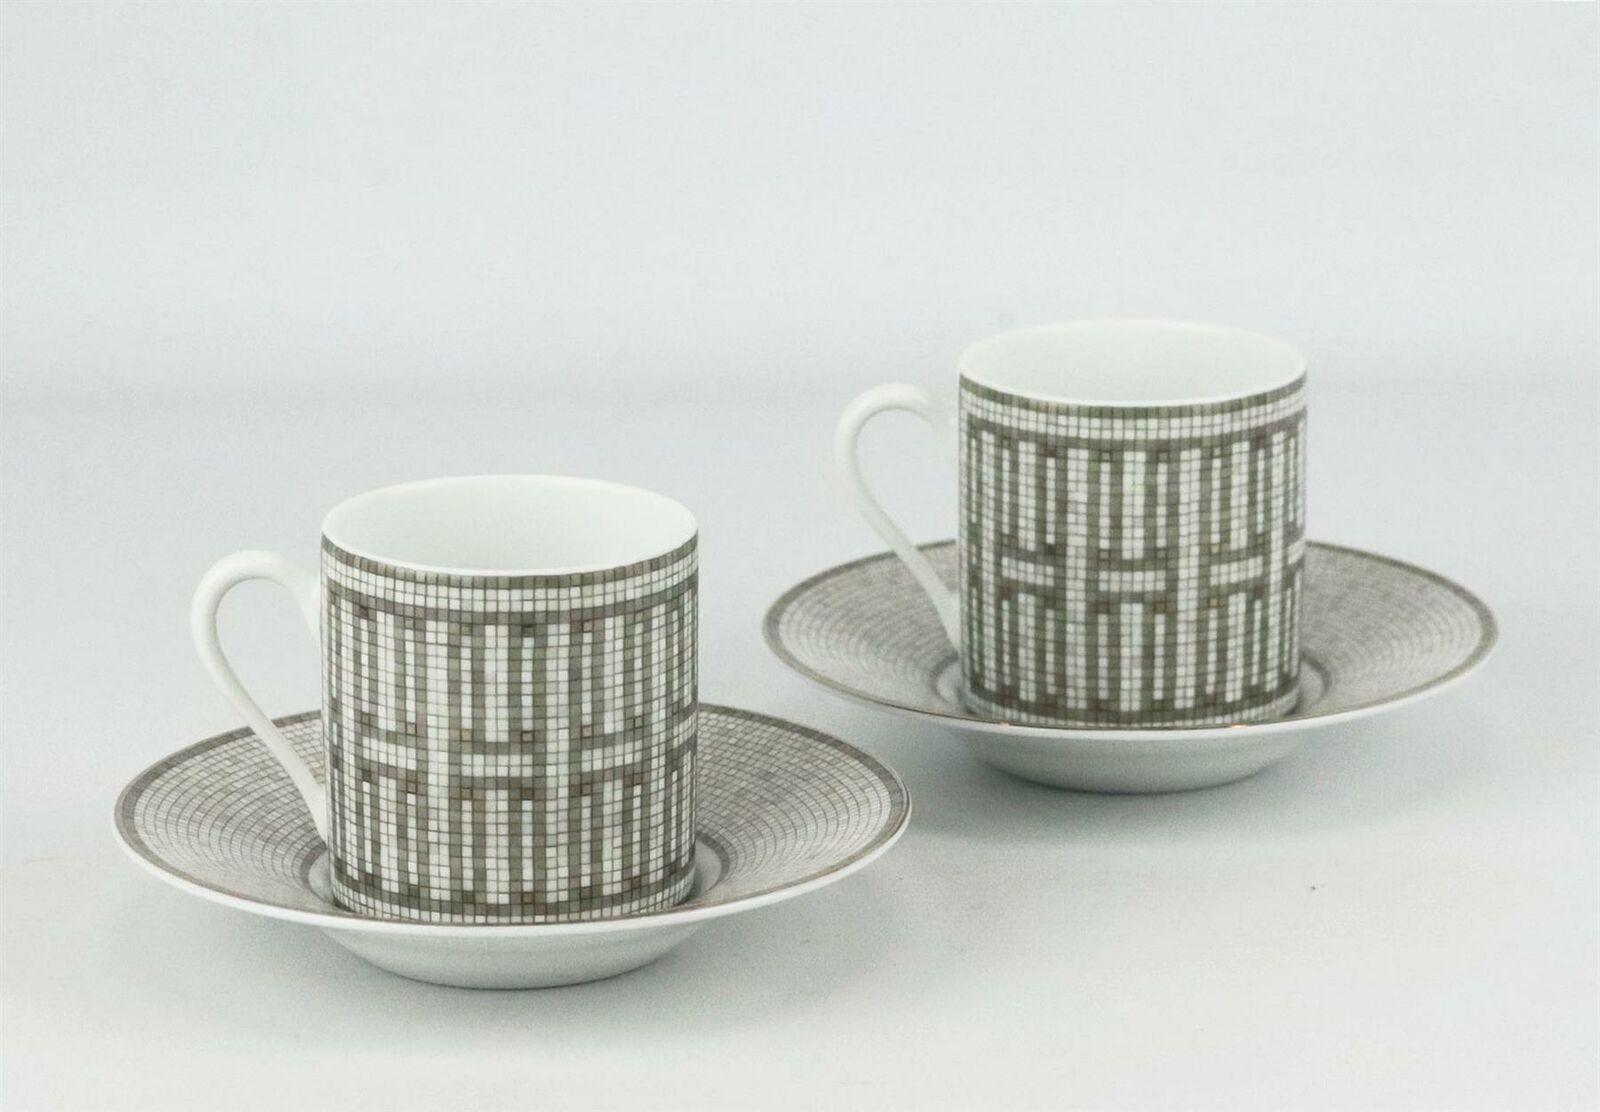 Set of 2 platinum, grey and white porcelain Hermès Mosaïque Au 24 coffee cup and matching saucer with tile design throughout, gilt accents and brand stamp on the bottom.
Does not come with box.

Dimensions: H 2.5 x D 2.25 inches.
Saucer: D 4.75